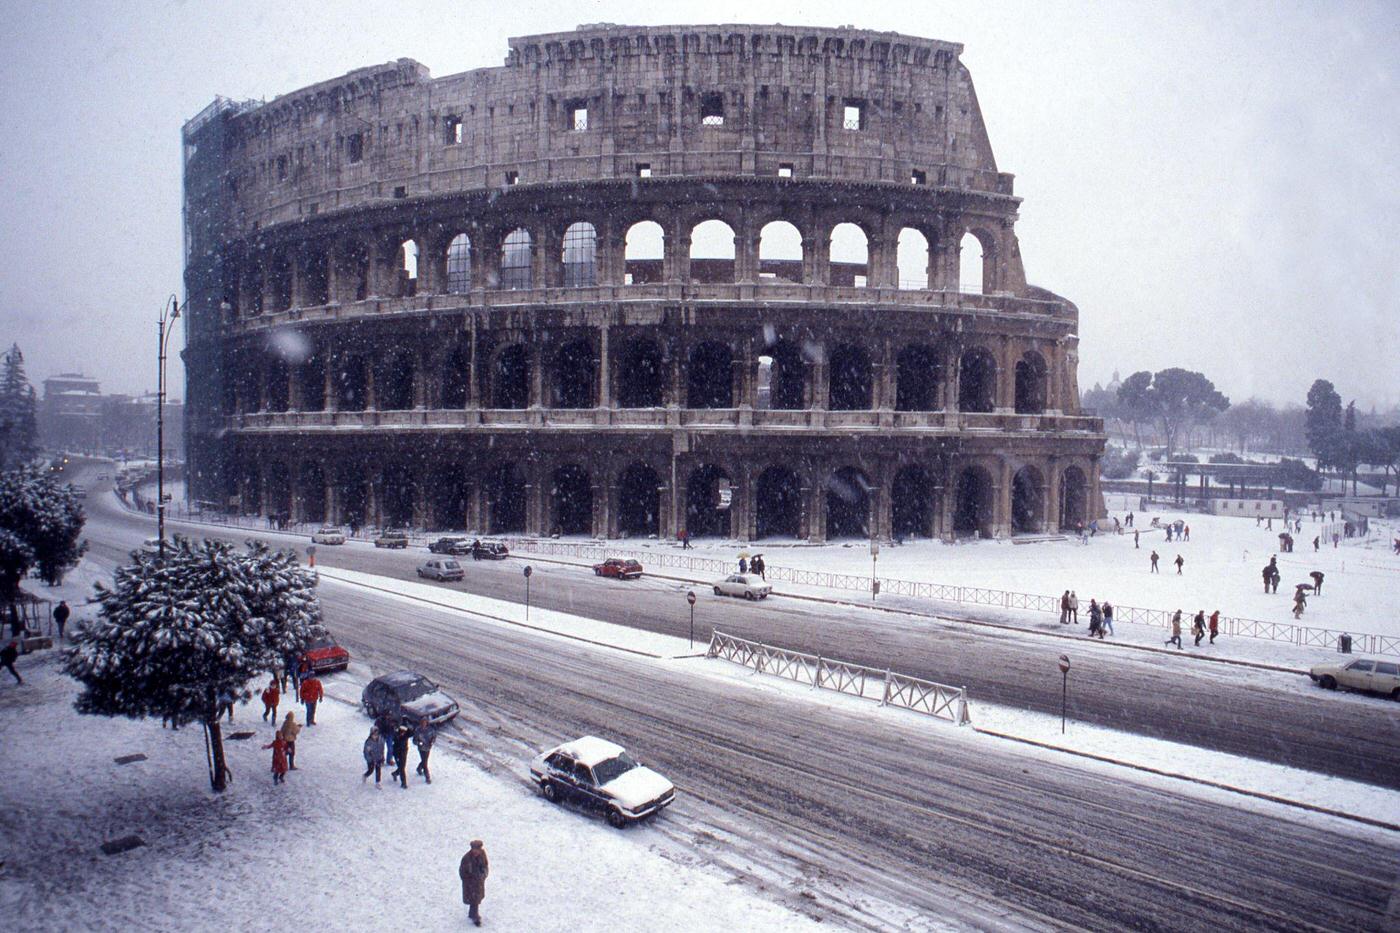 Snow-Covered Colosseum in Rome, 1985